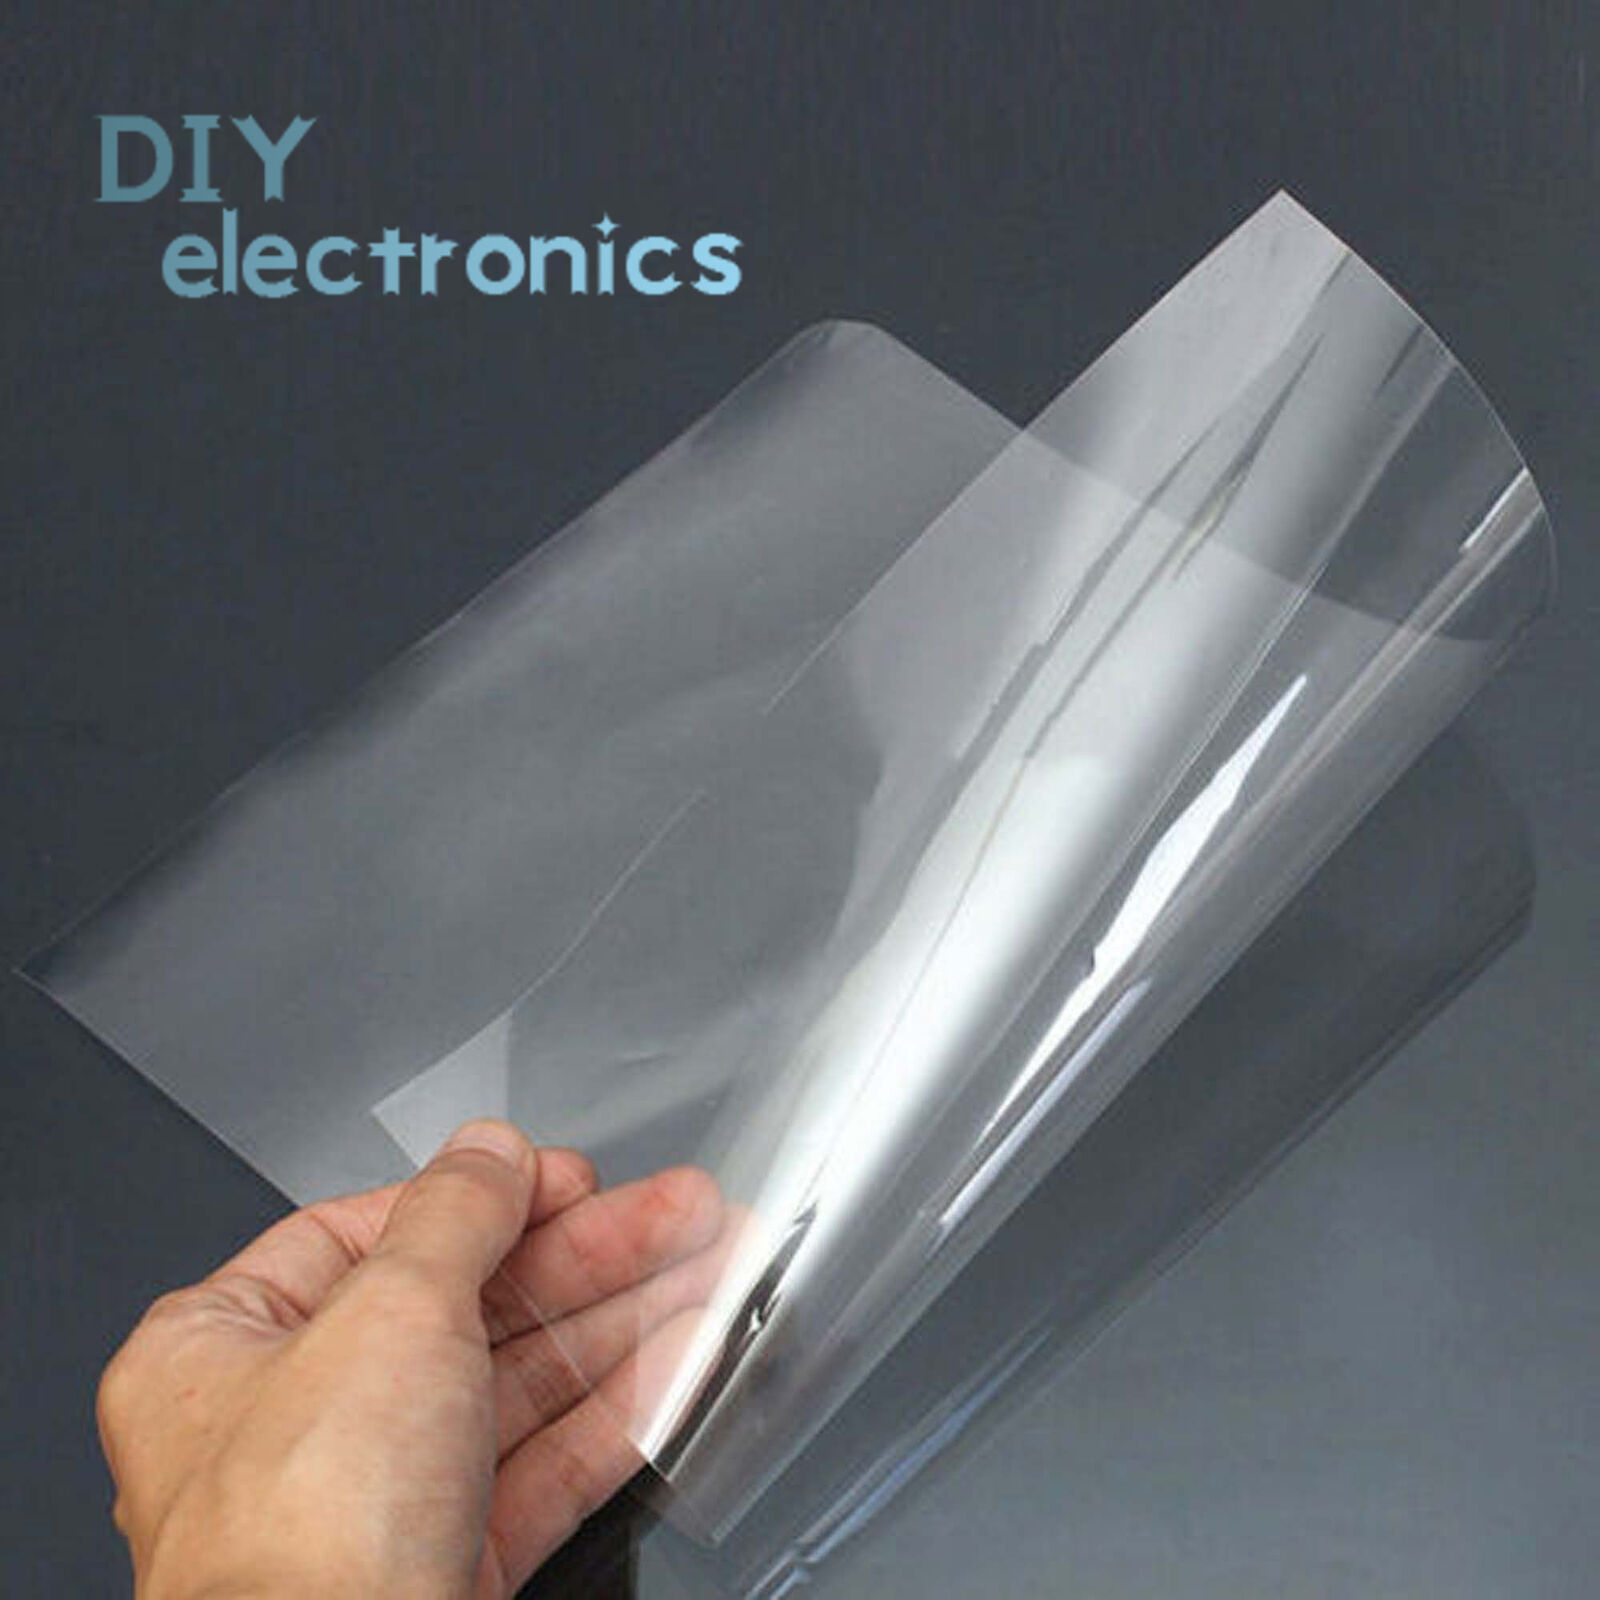 5pcs/10pcs A4 Laser Printing Transparency Film Photographic Paper For DIY PCB US